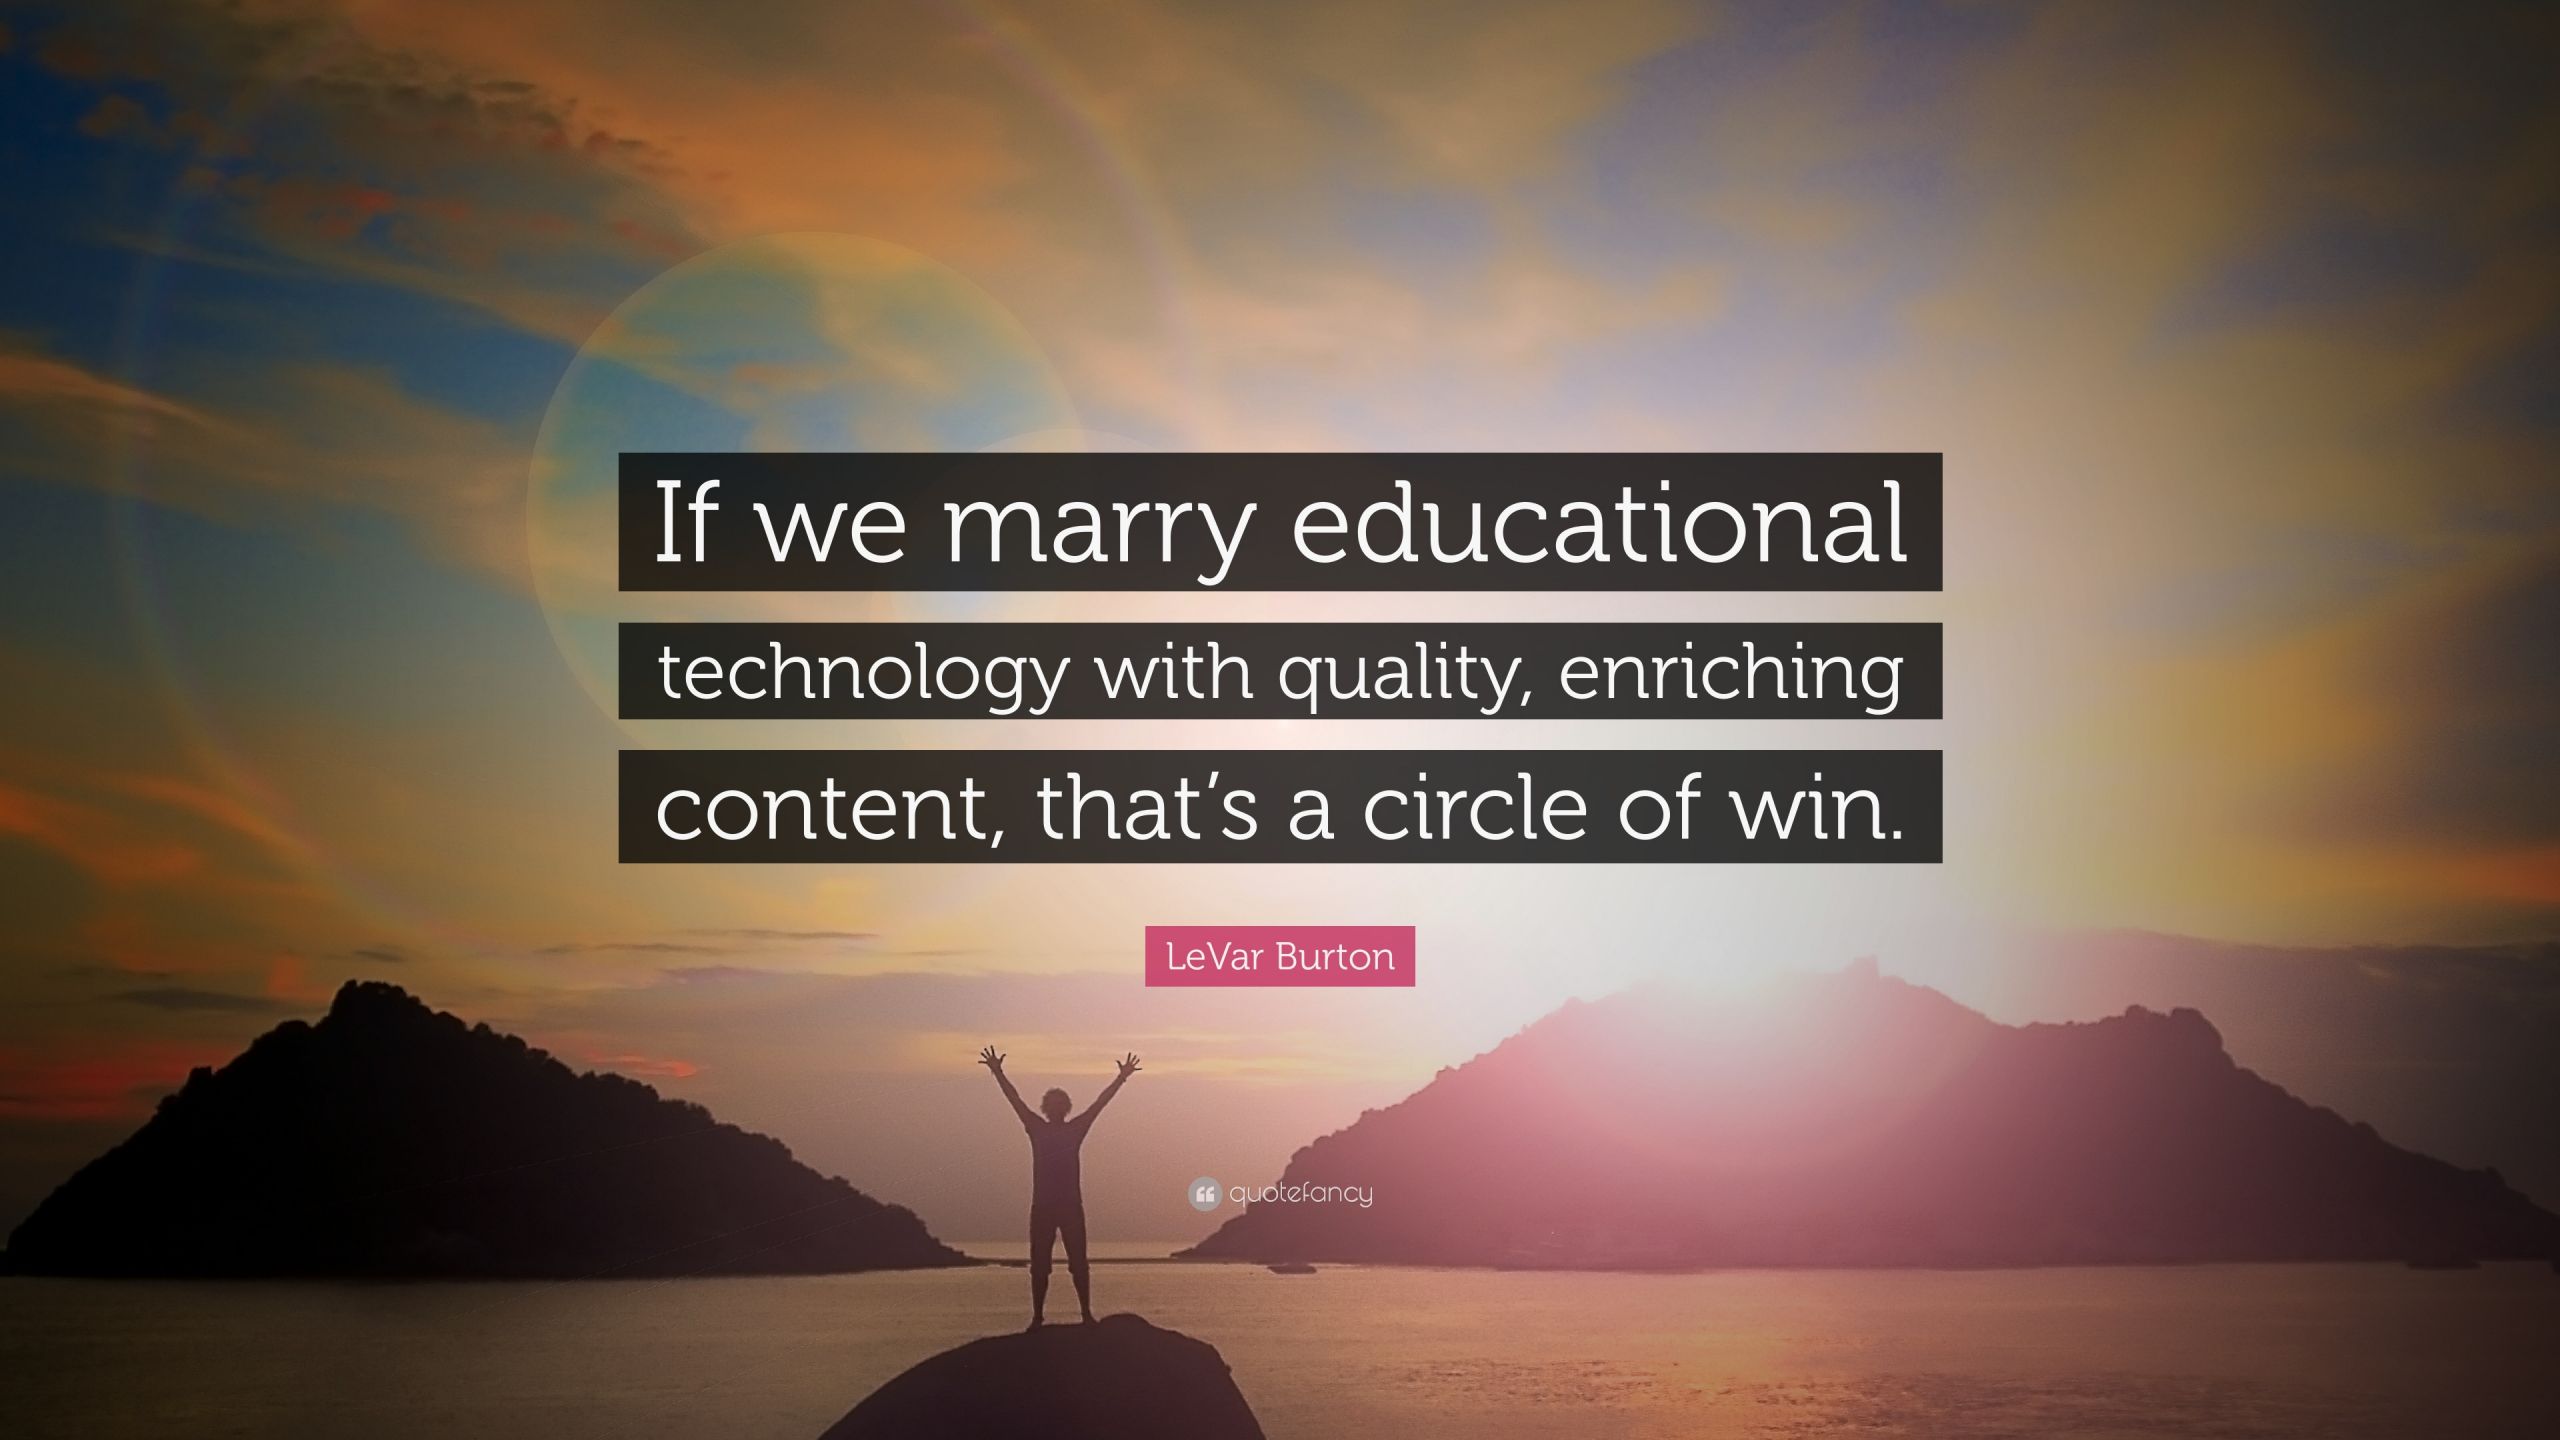 Quotes About Technology In Education
 LeVar Burton Quote “If we marry educational technology